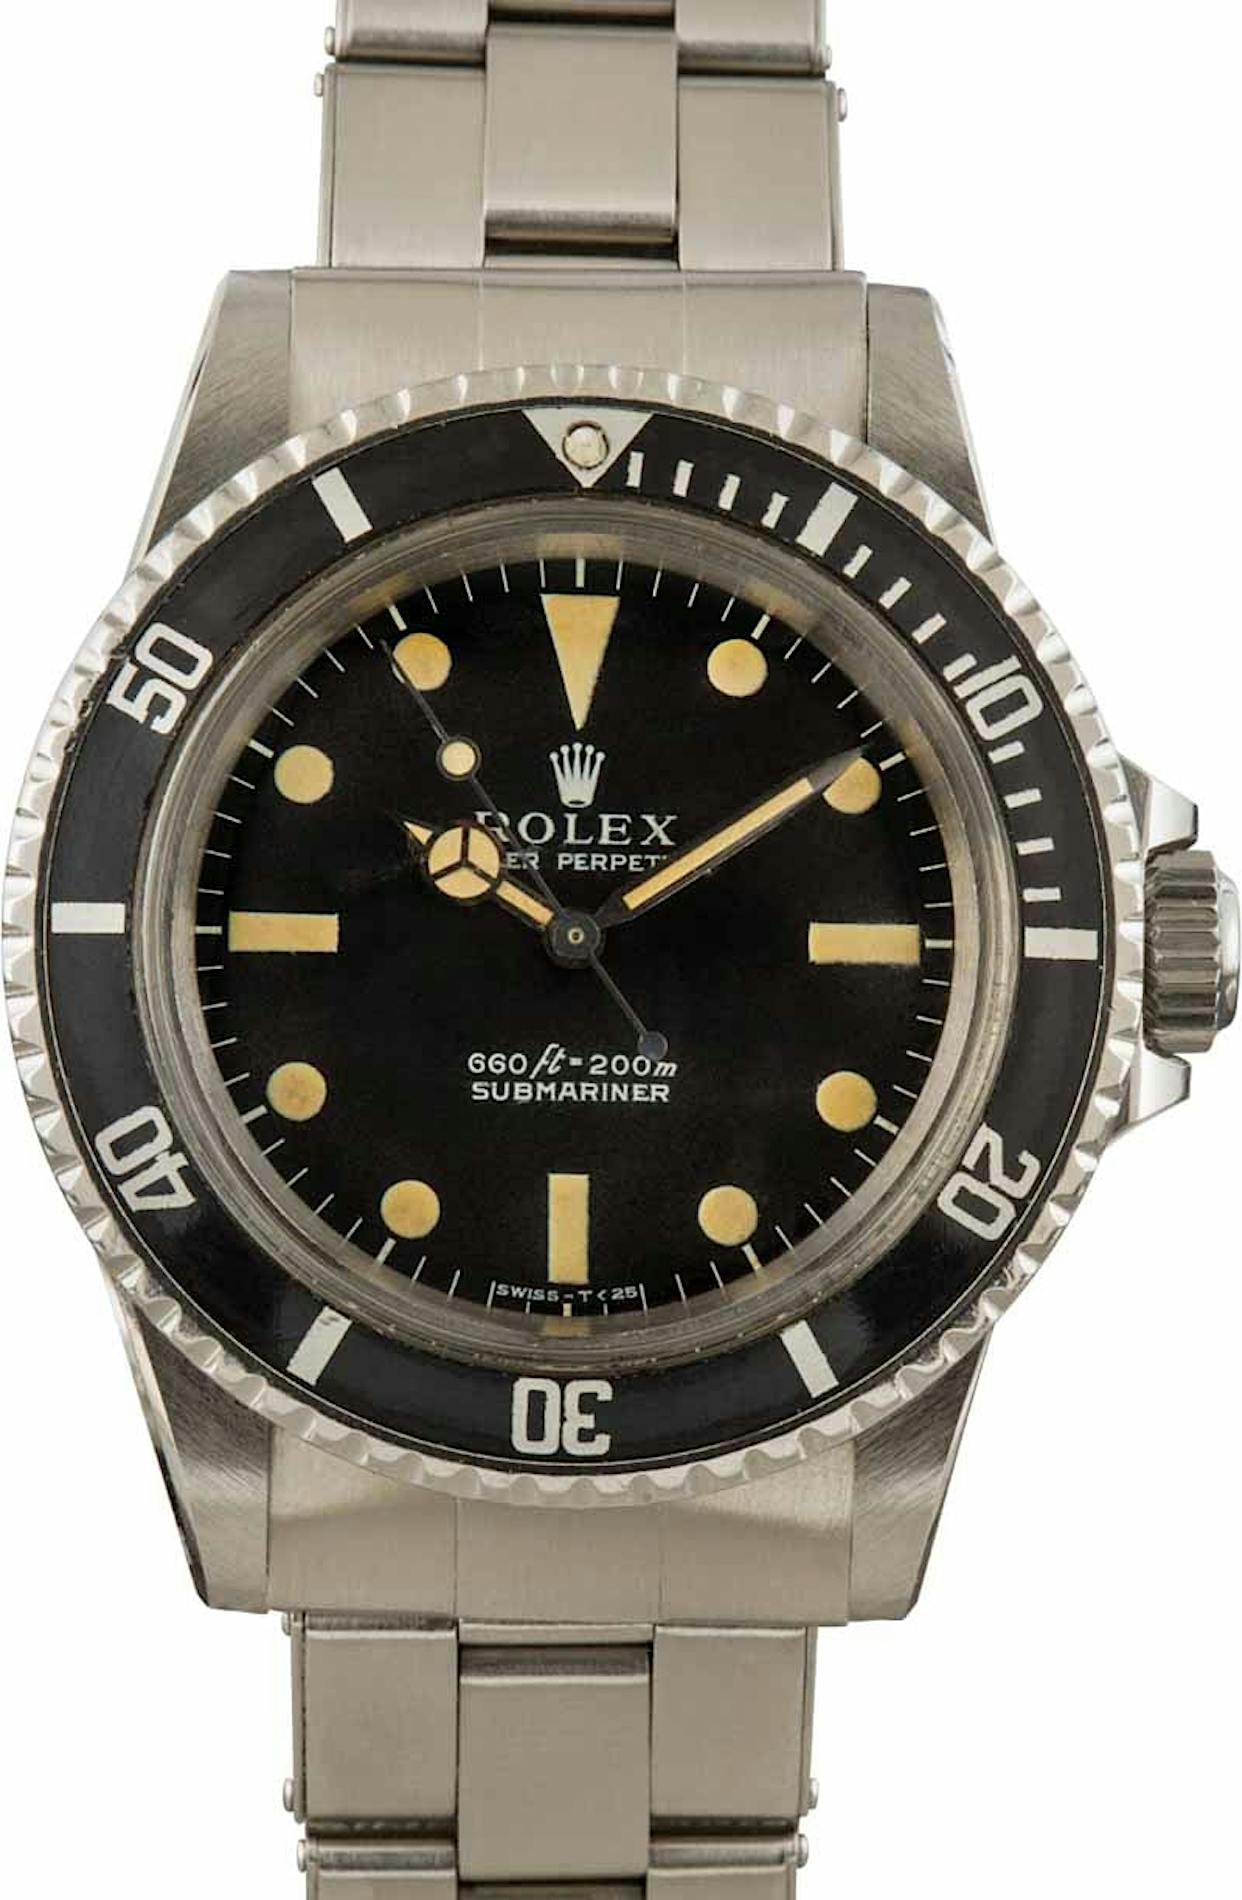 Rolex Submariner Watches for Sale - Authenticity Guaranteed 